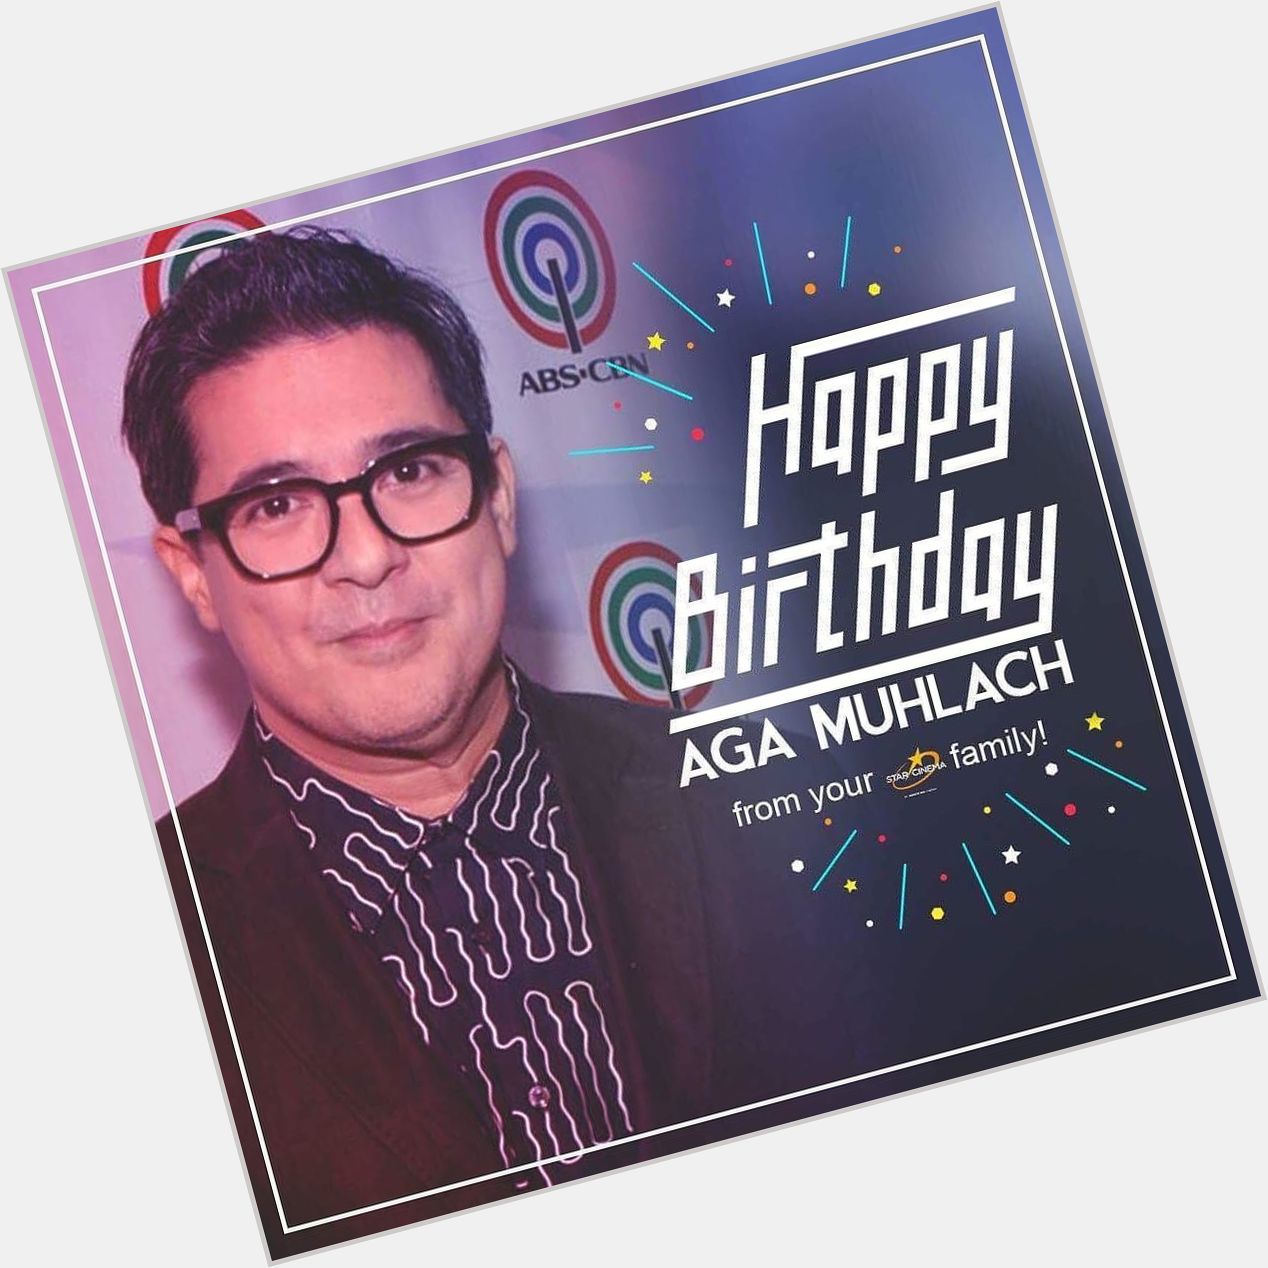 Happy birthday to our forever leading man Aga Muhlach! Have a wonderful day! 